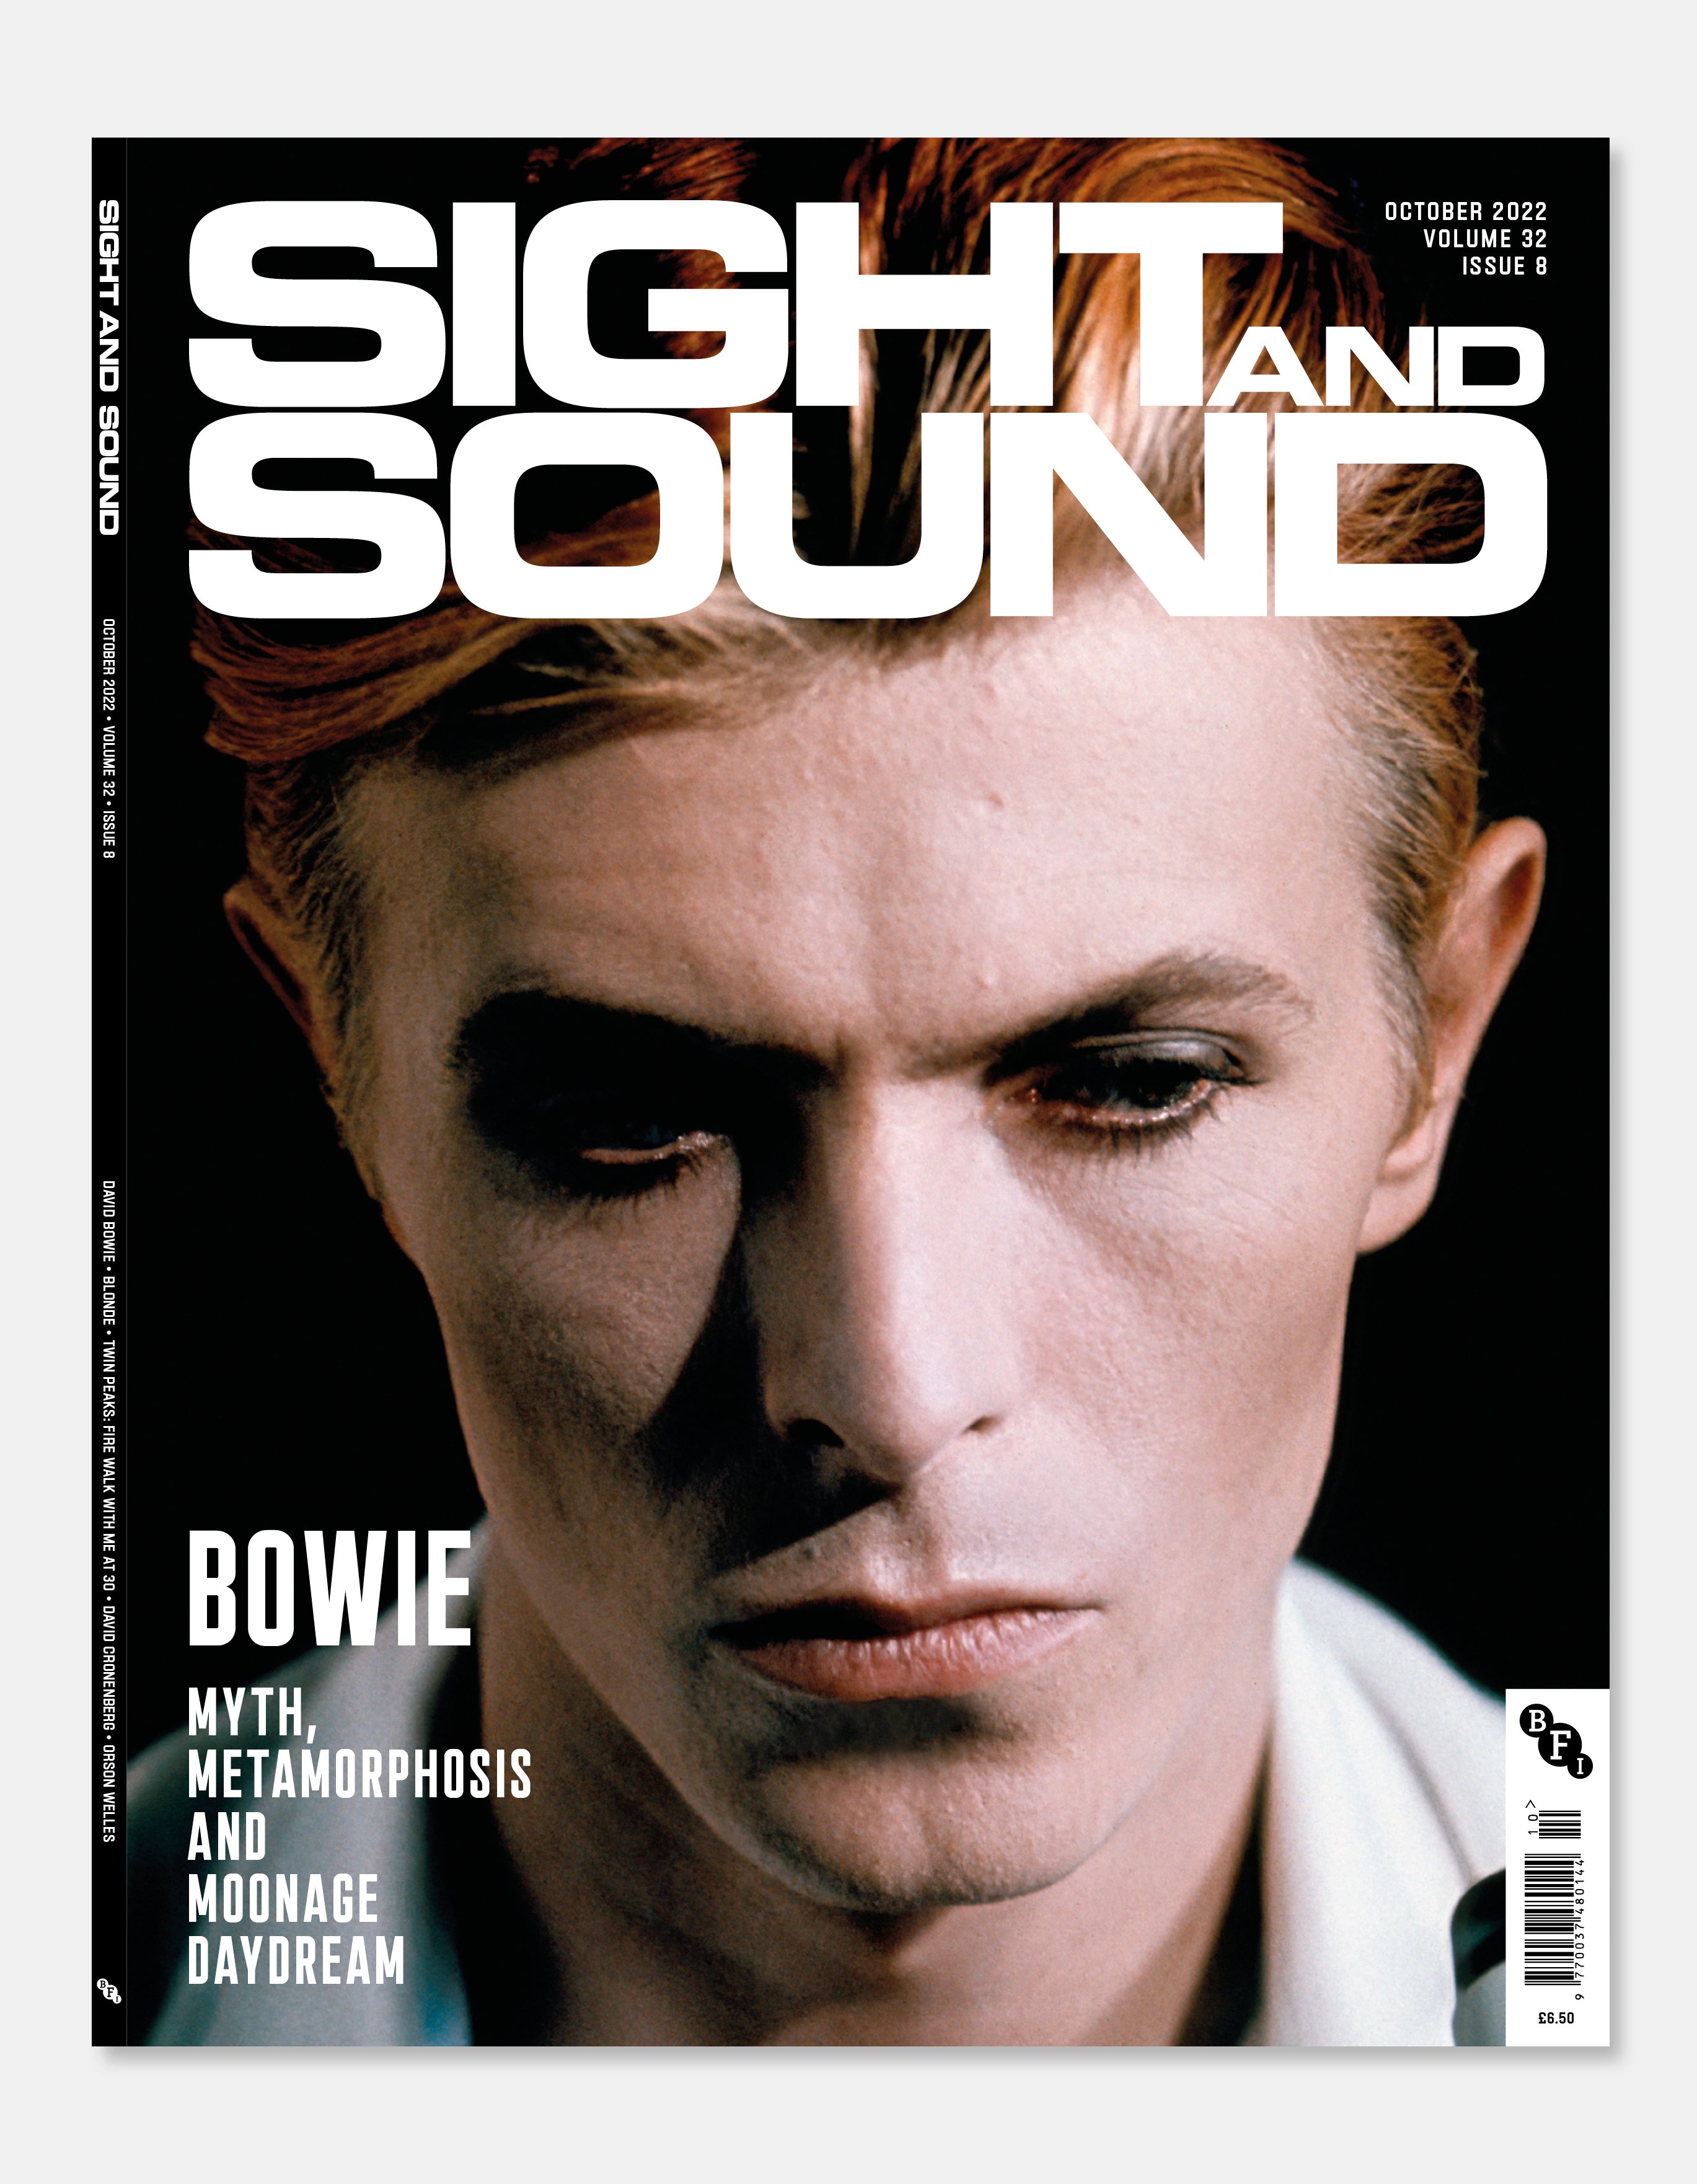 Sight and Sound Magazine – David Bowie - October 2022